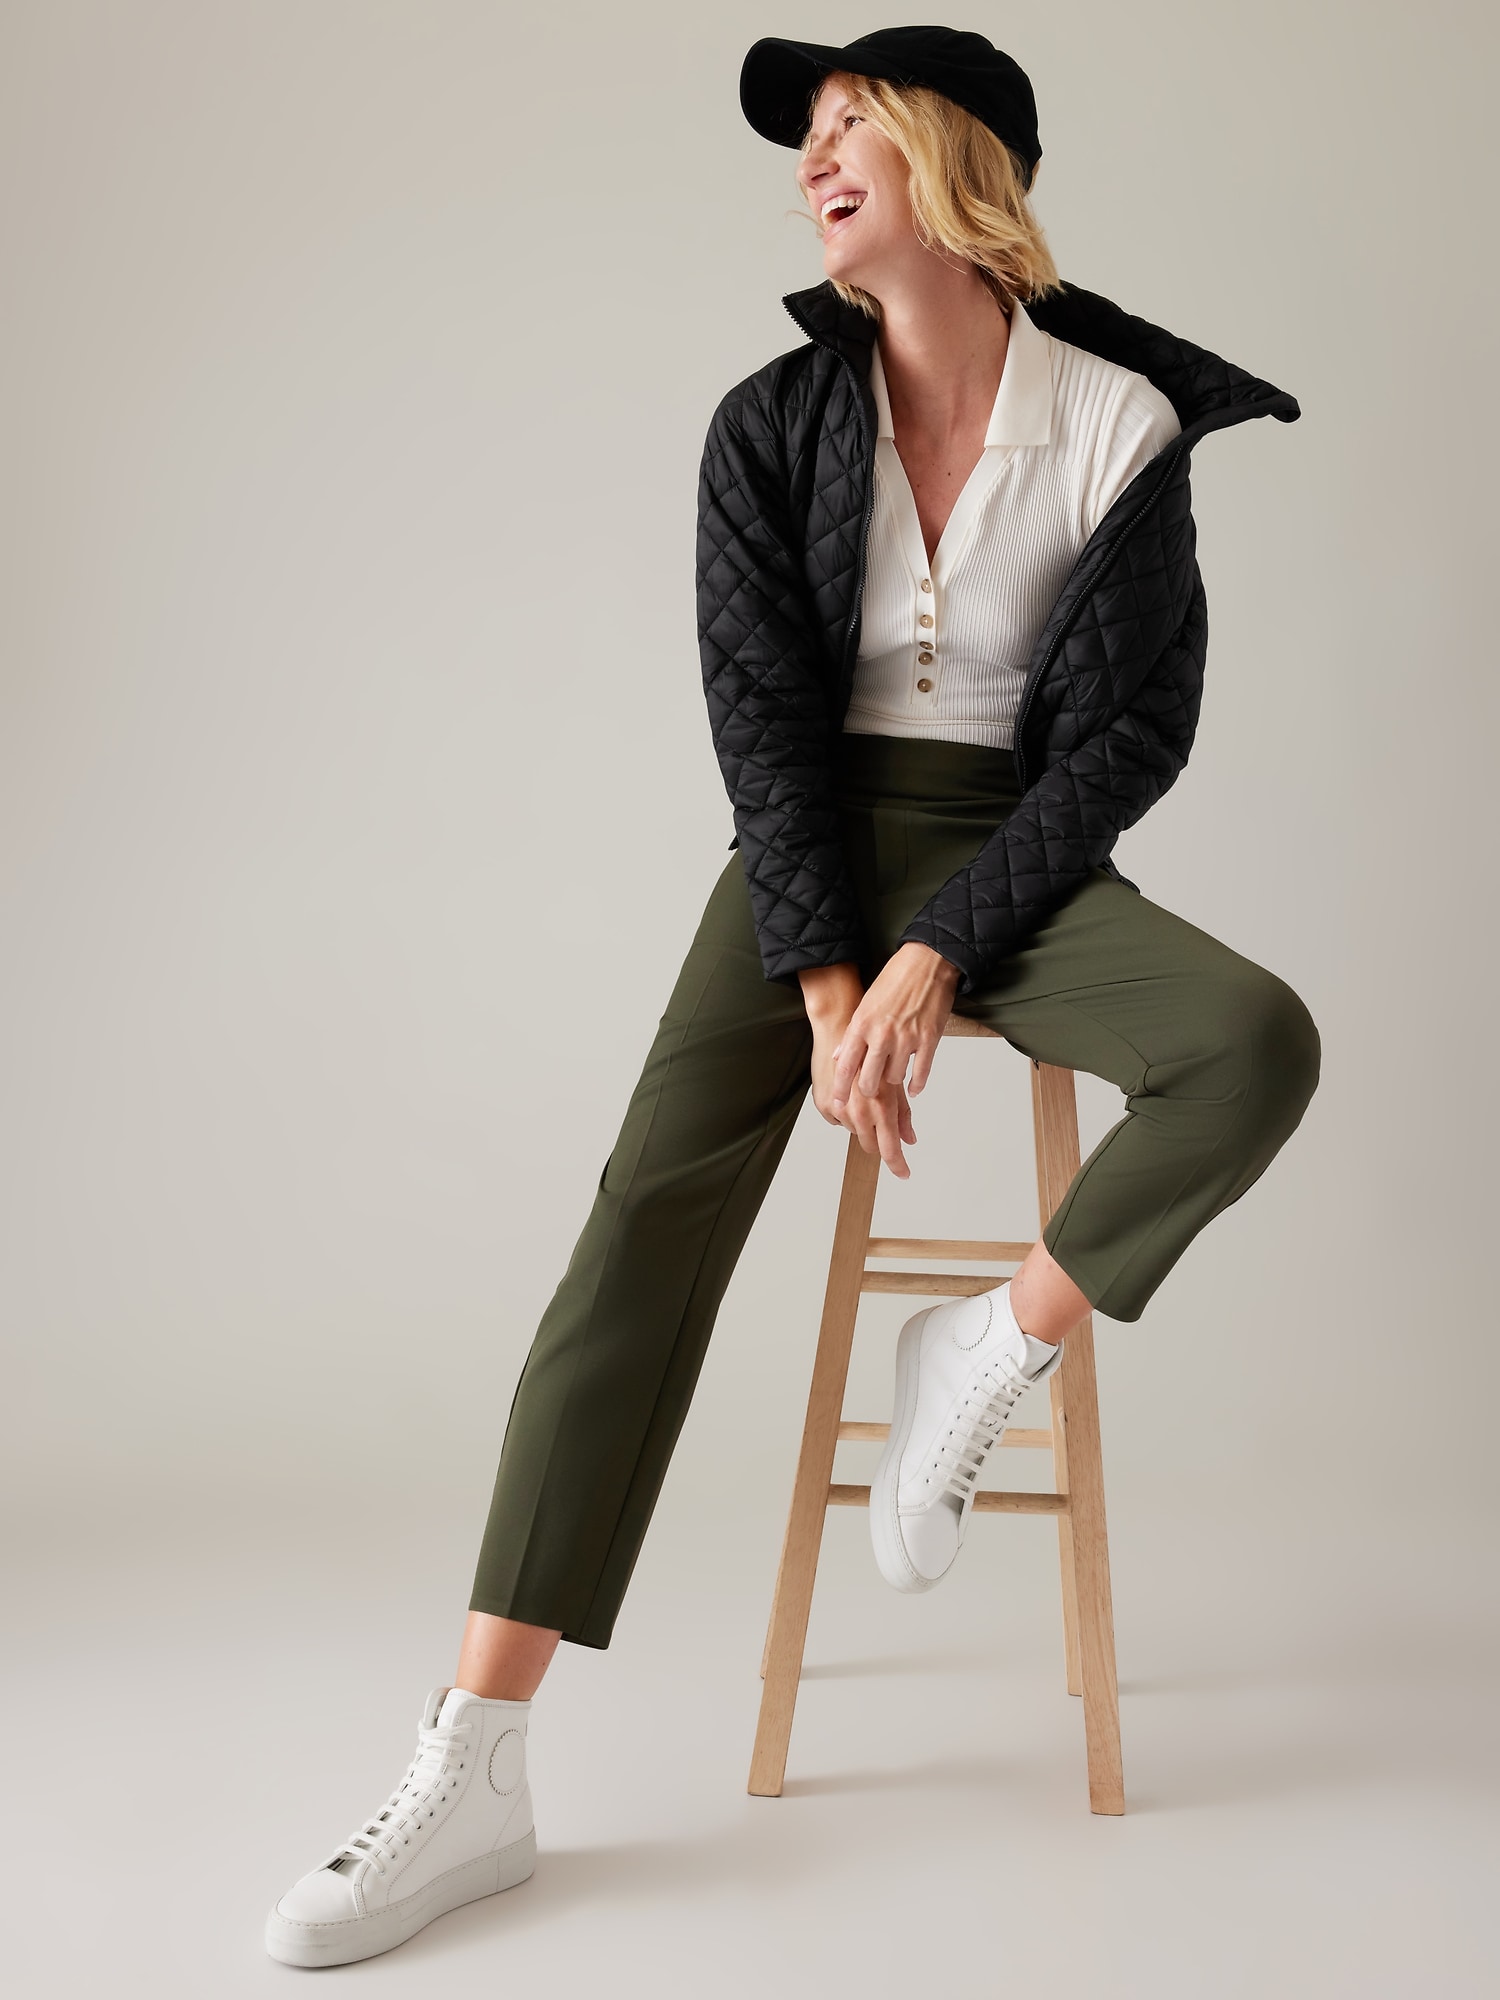 The Athleta Endless Pant Is a Versatile Pant for Spring